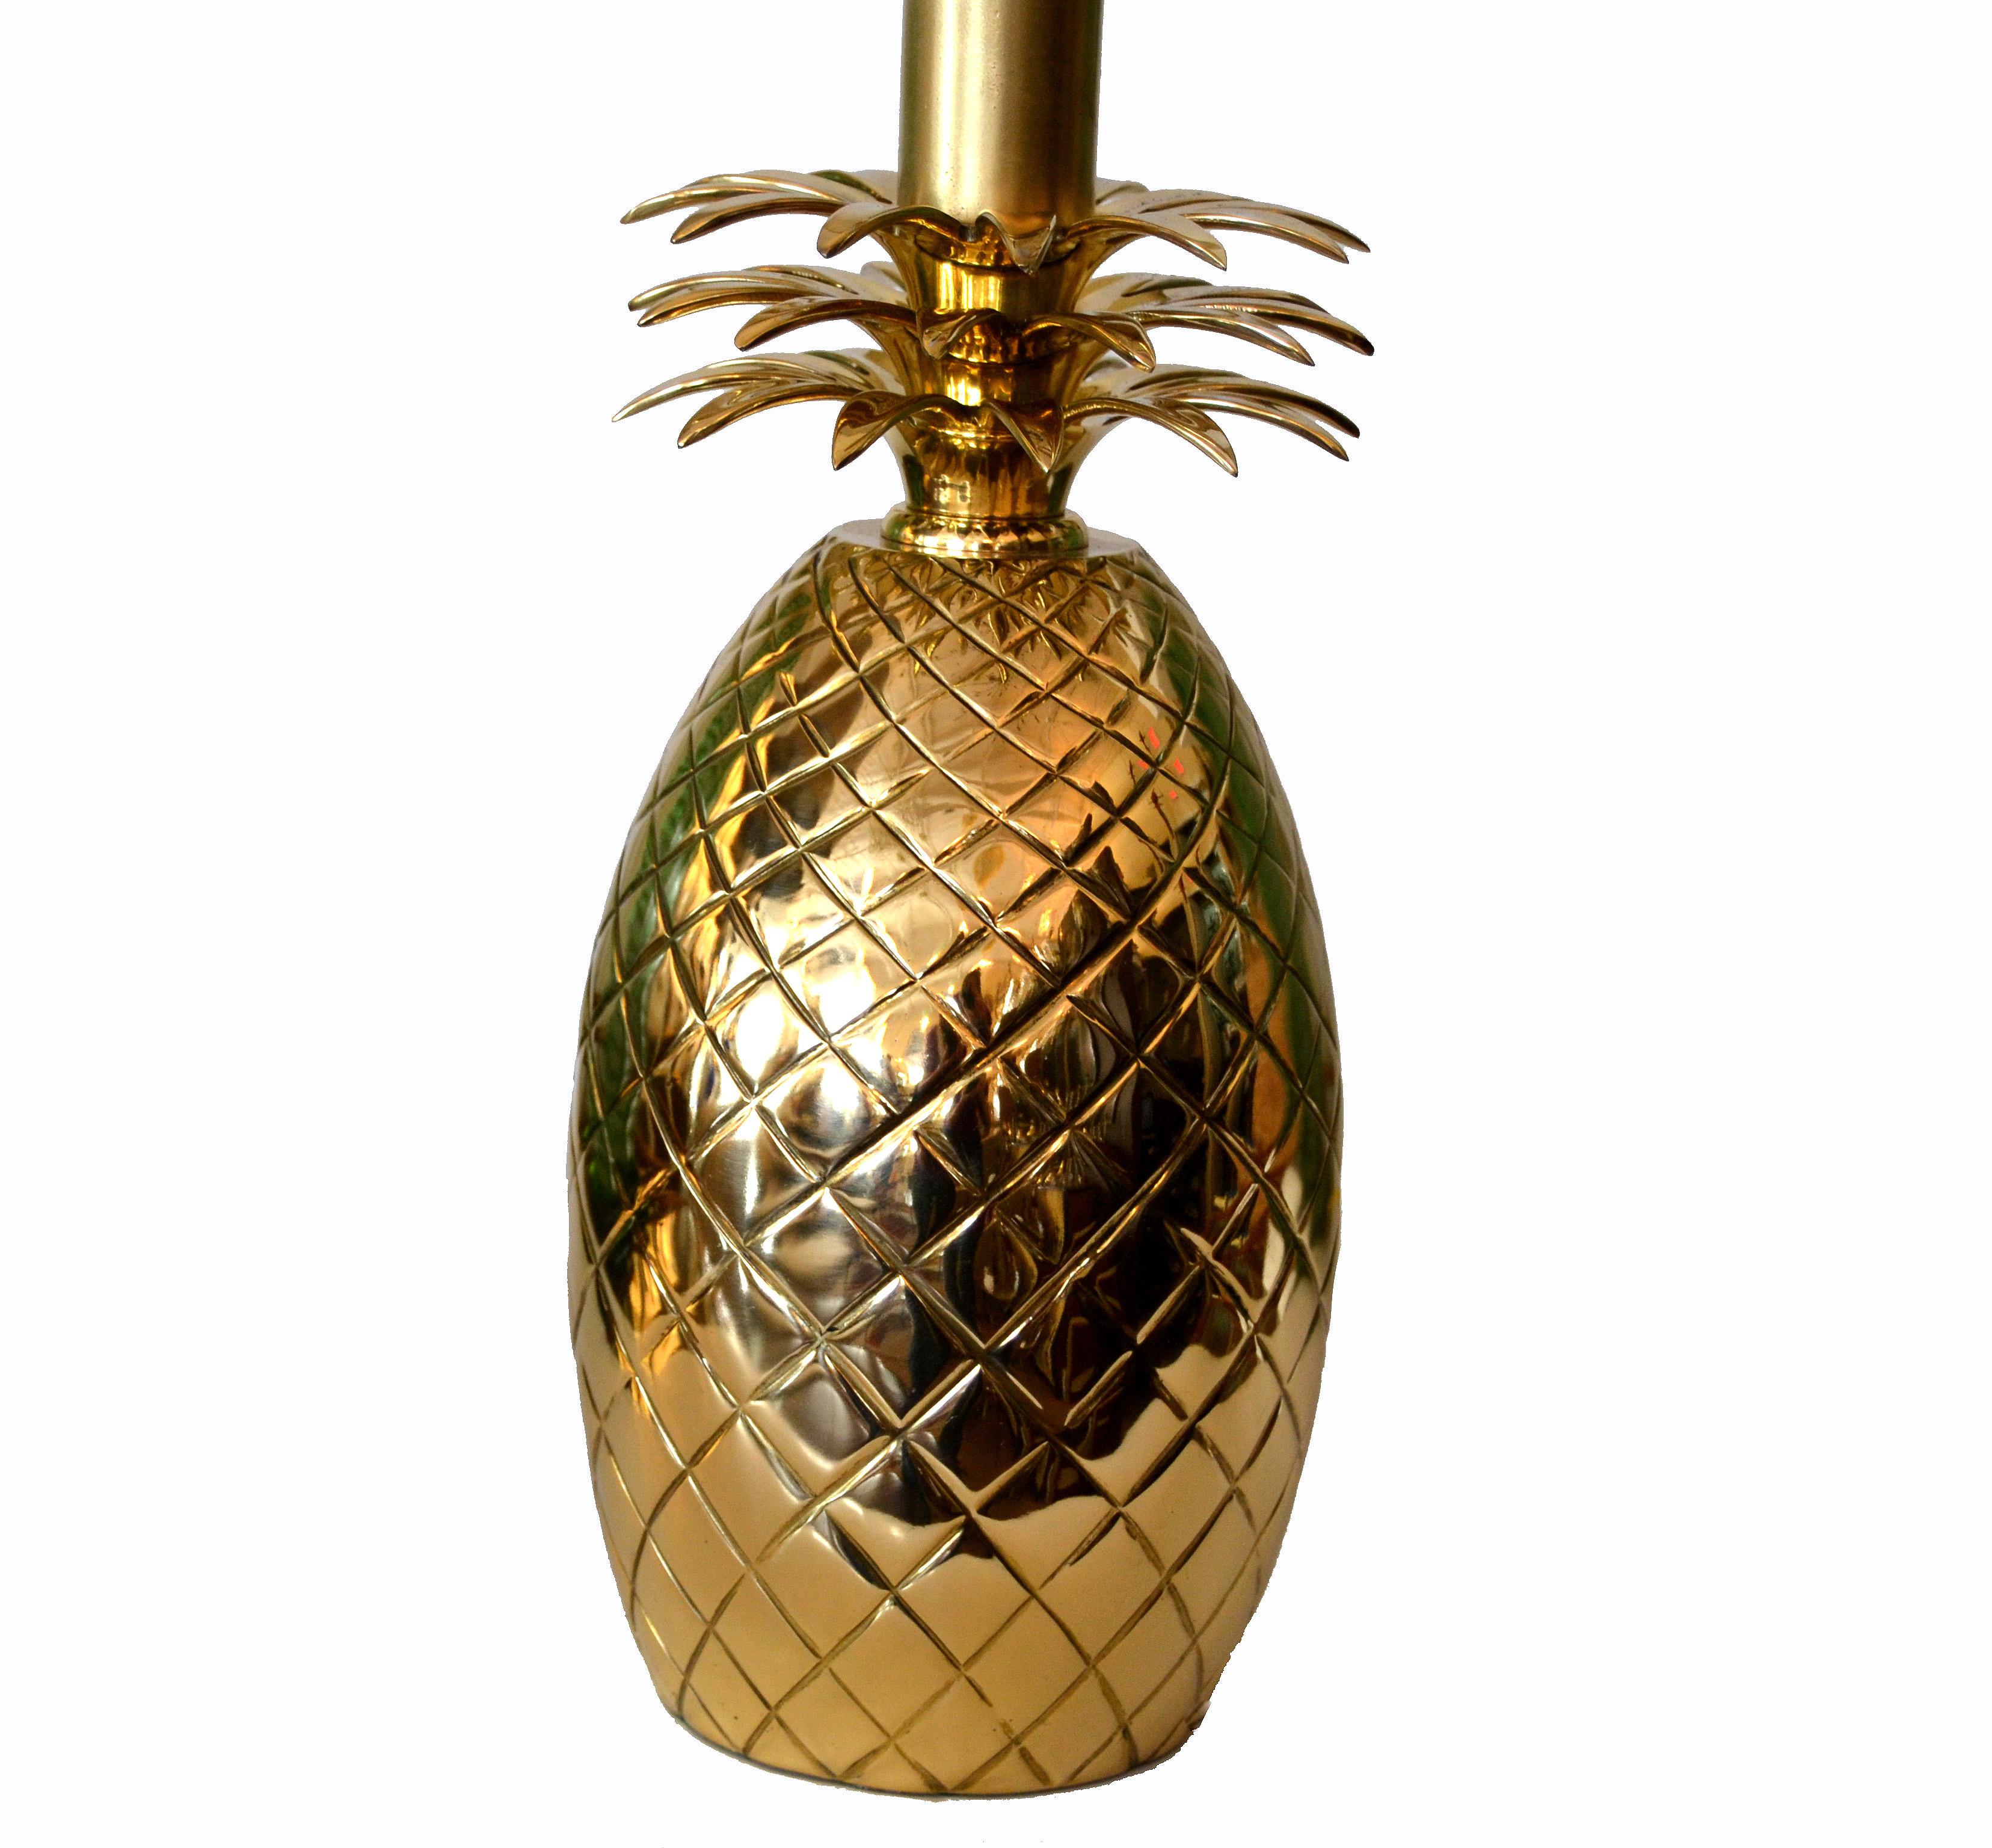 20th Century Hollywood Regency Sculptural Bronze Pineapple Table Lamp with Harp and Finial